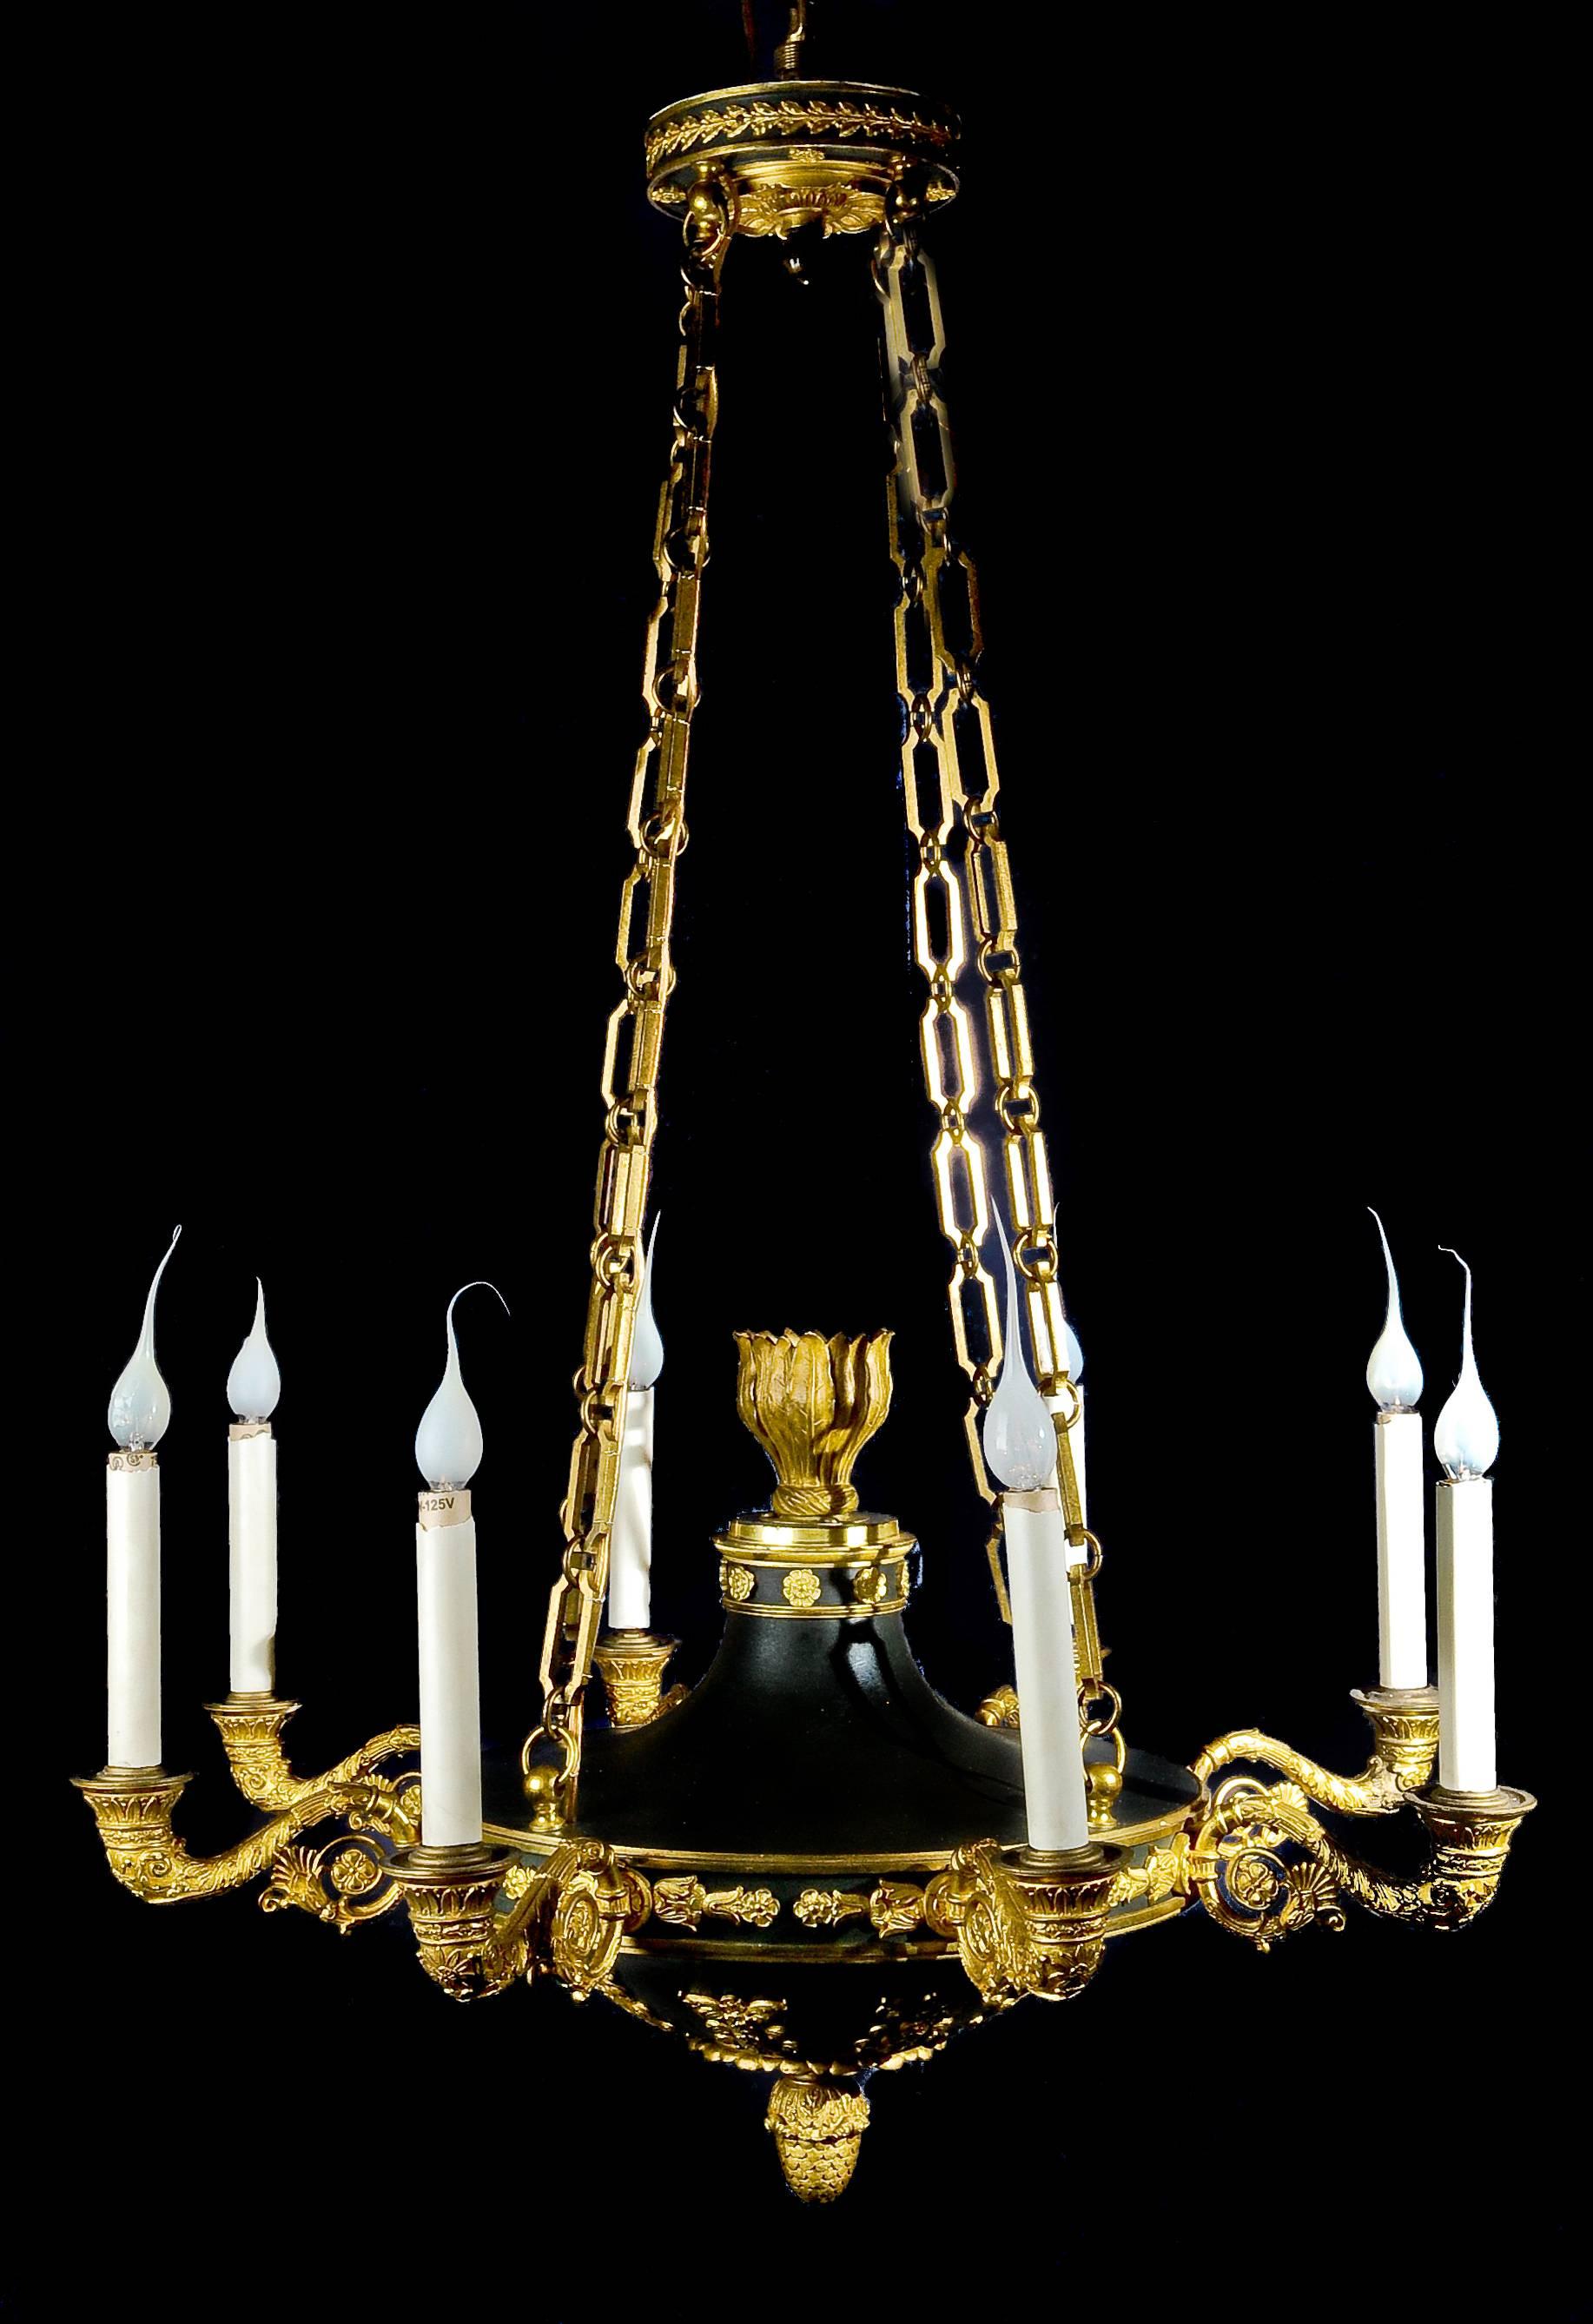 A fine antique French empire neoclassical multi light gilt bronze and patinated bronze chandelier of great detail.